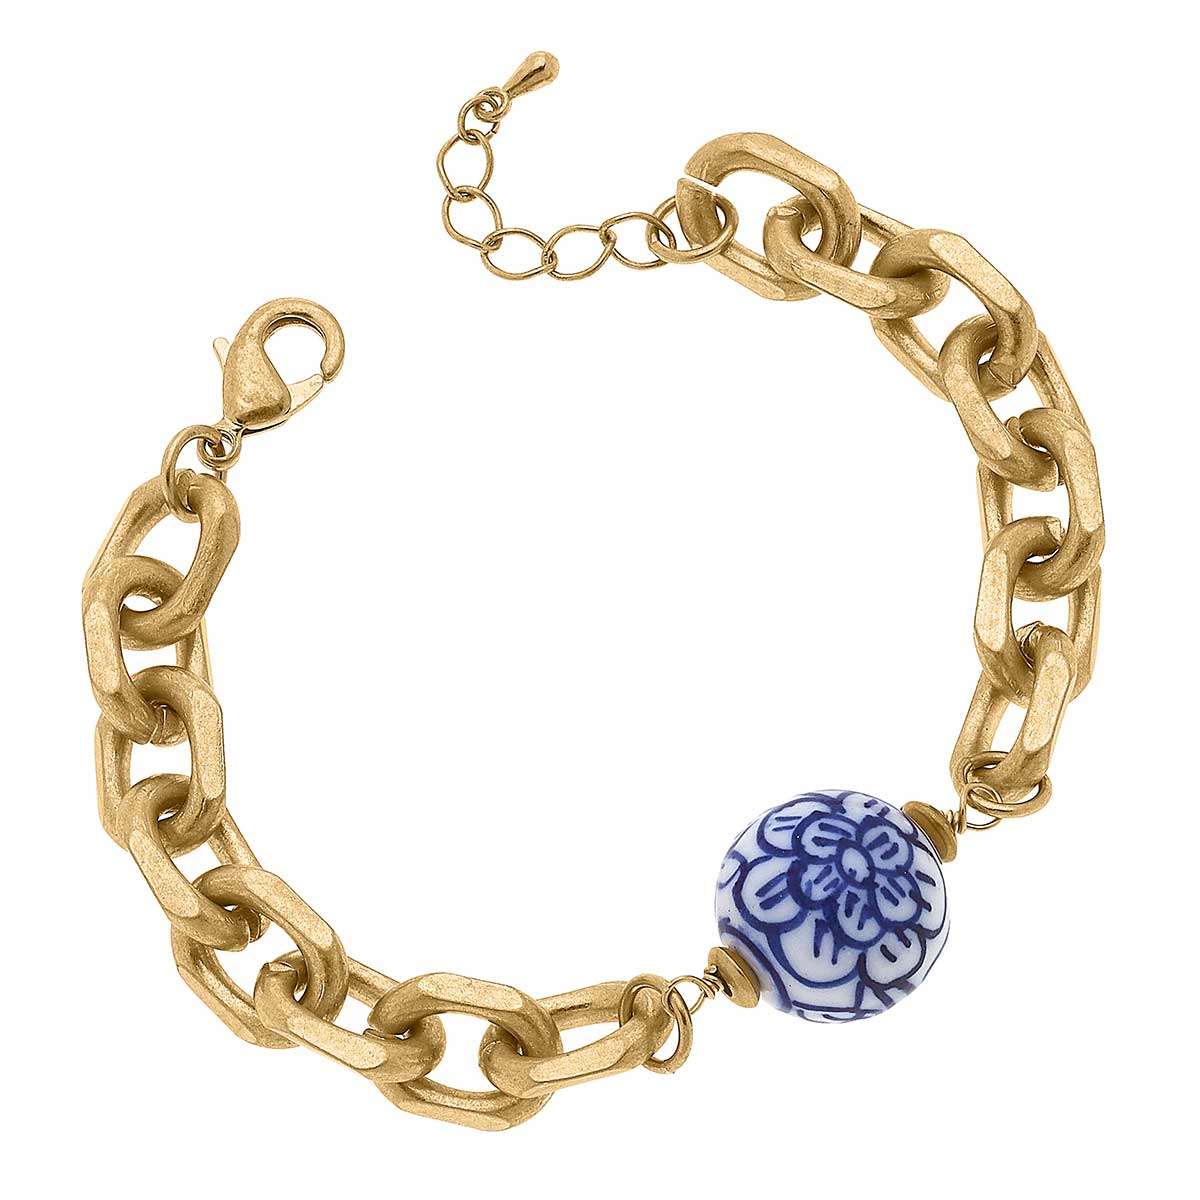 Marchesa Chinoiserie & Chunky Chain Bracelet in Blue & White